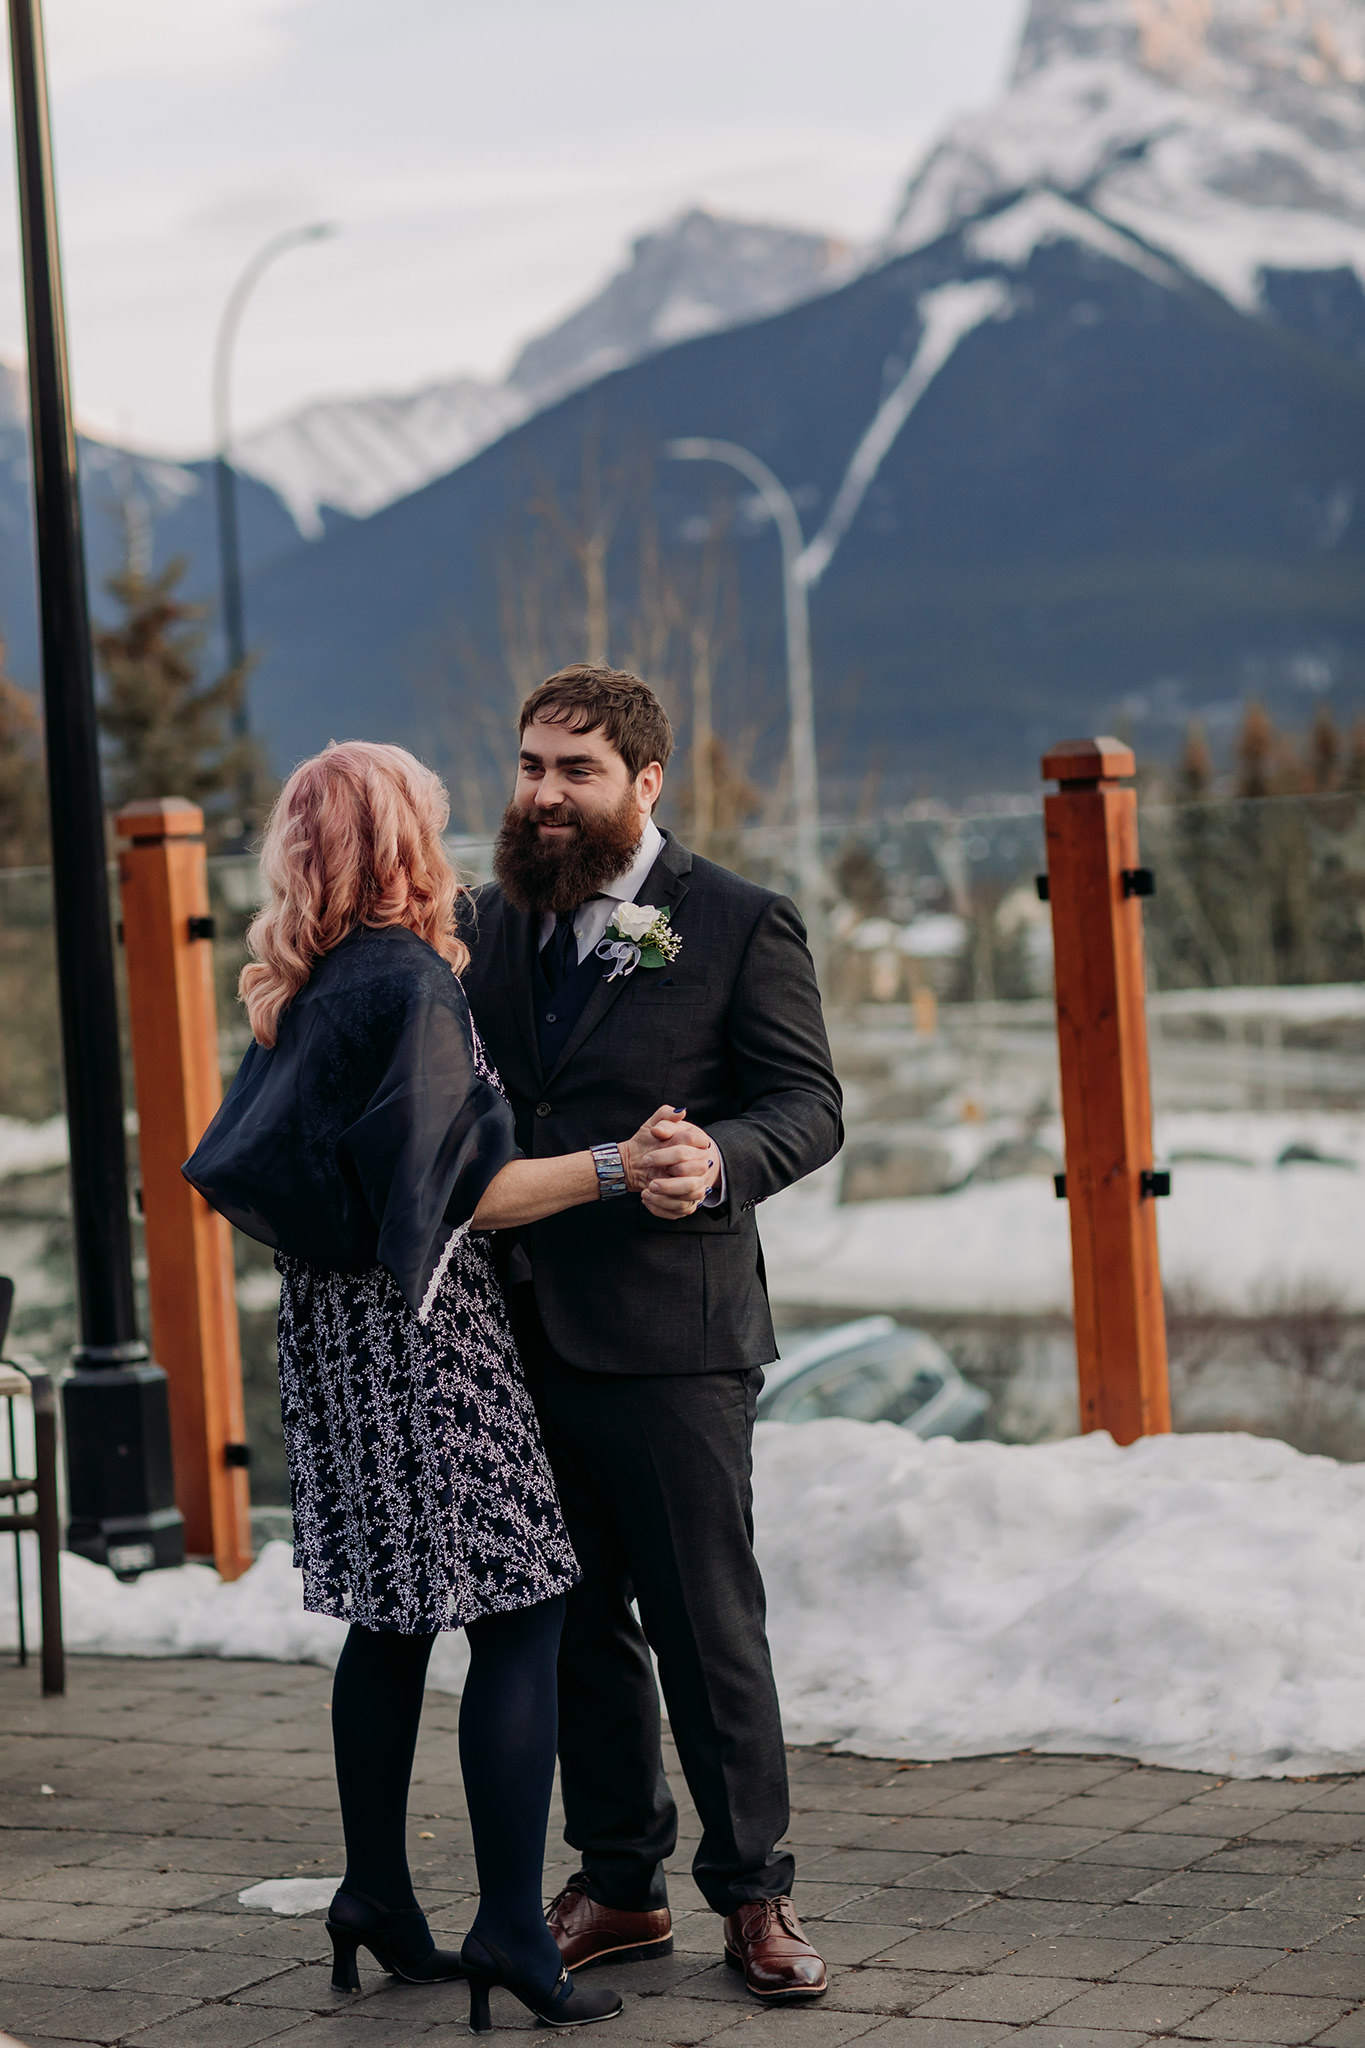 Iron Goat Pub wedding reception dancing on patio in winter photographed by ENV Photography